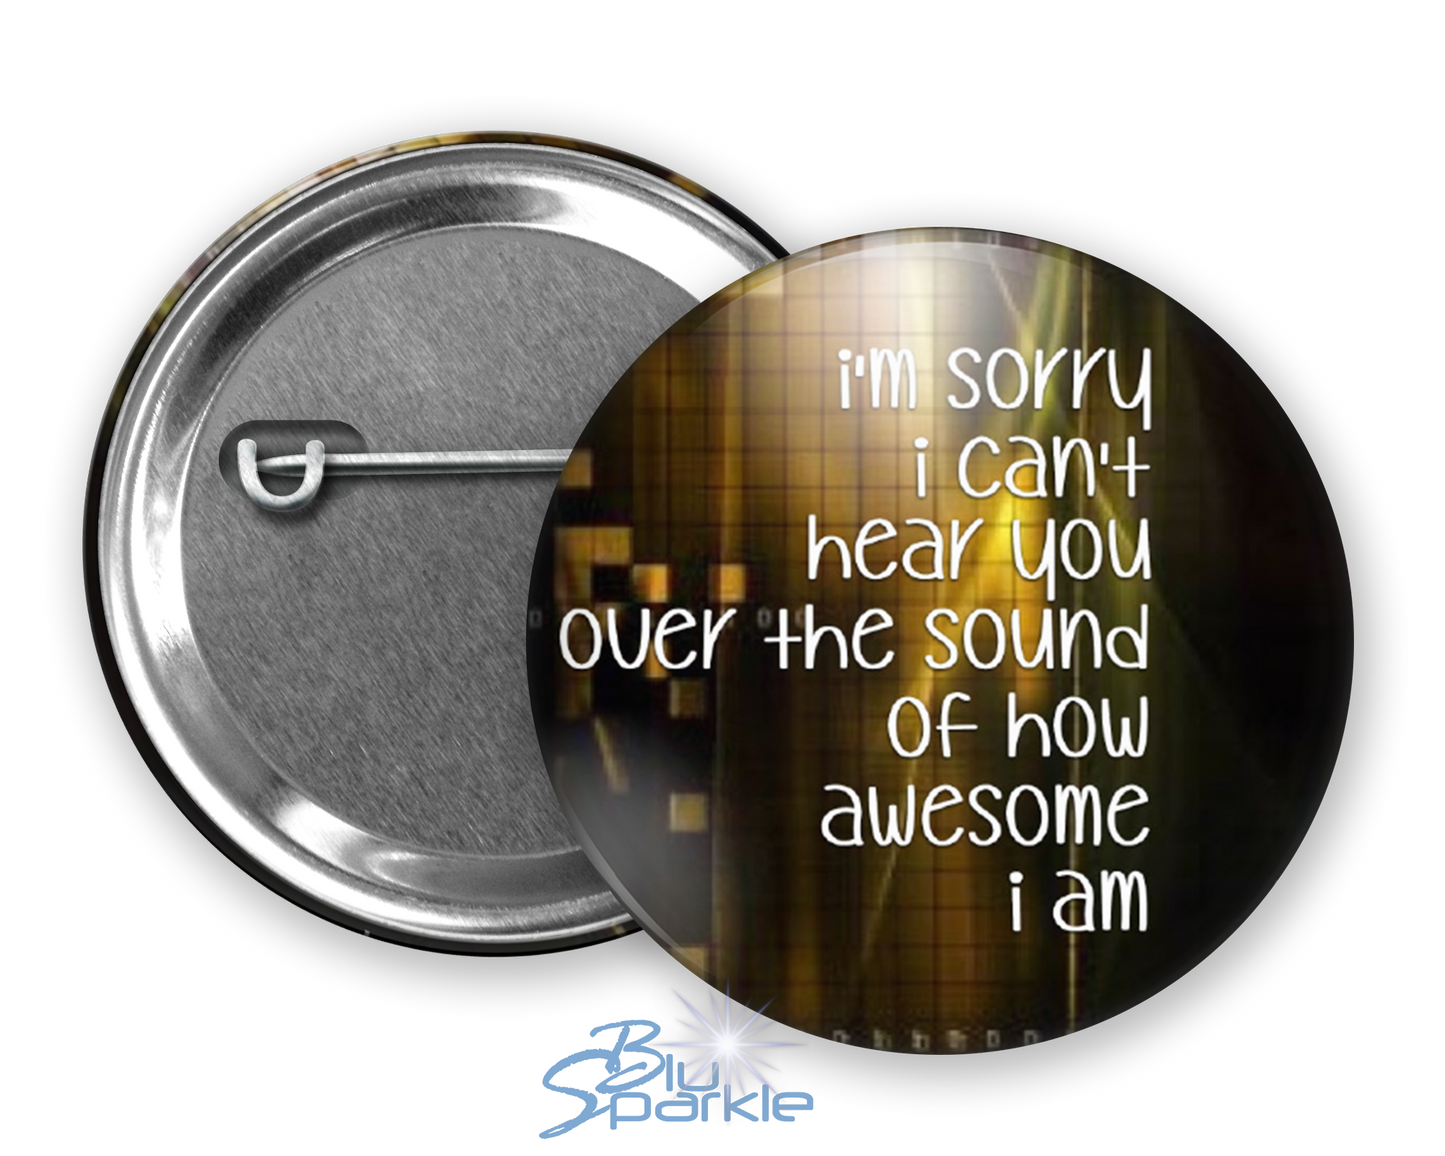 I'm Sorry I Can't Hear You Over The Sound Of How Awesome I Am - Pinback Buttons